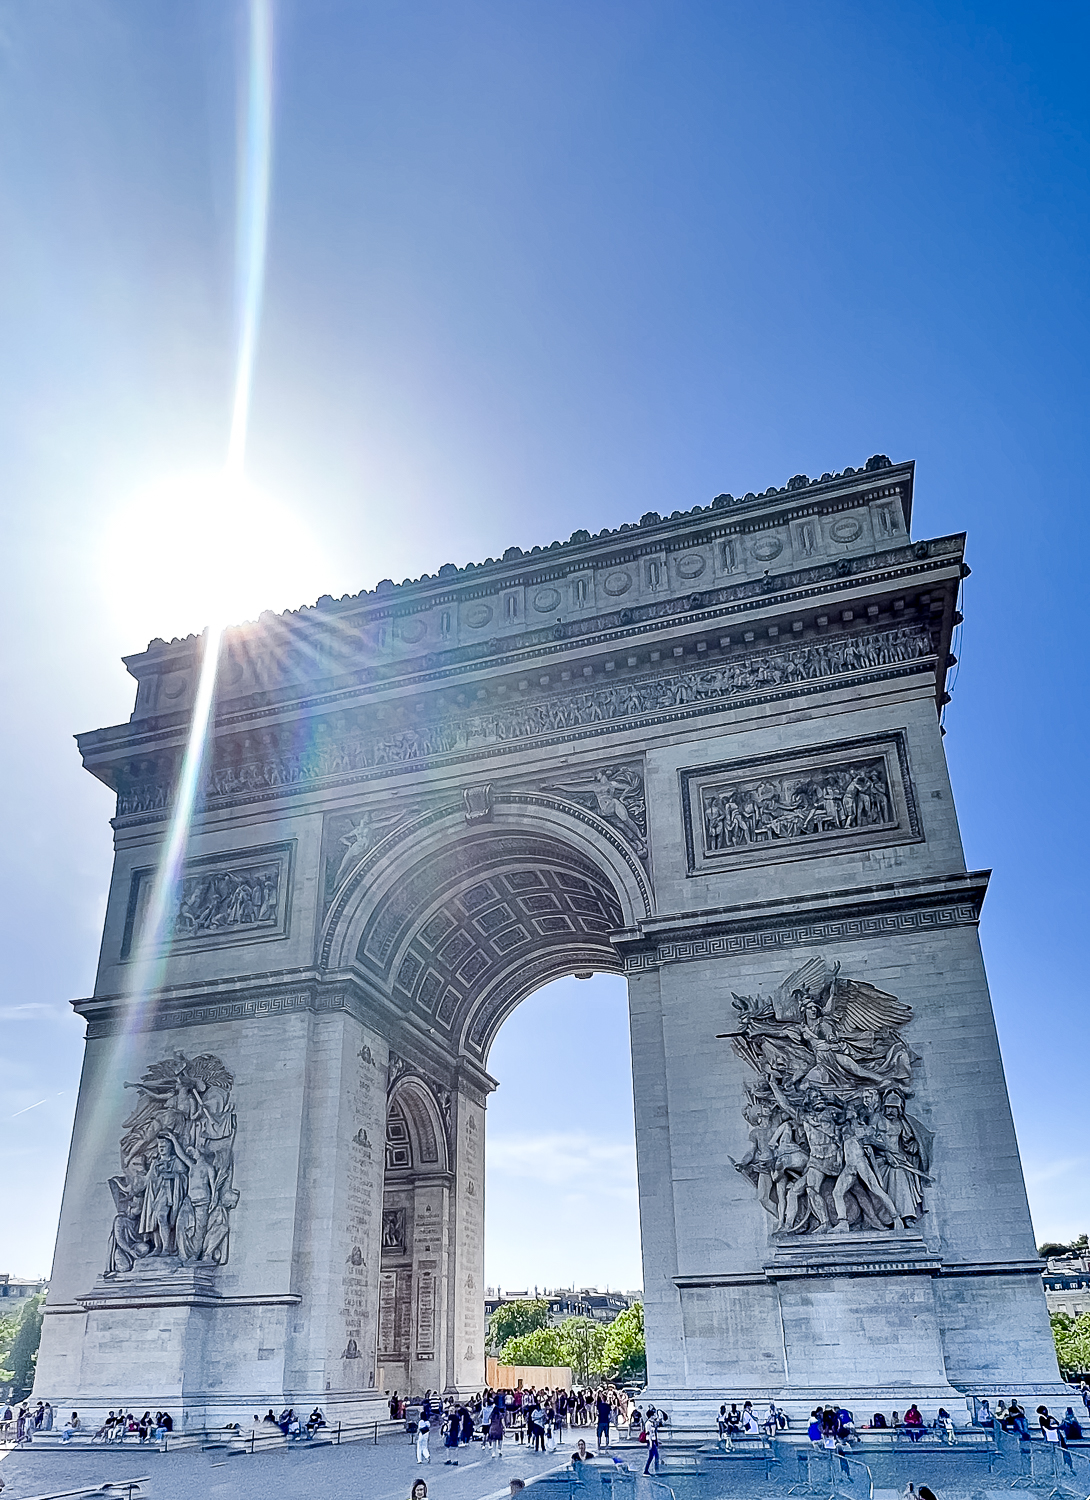 Pacific Globetrotters, budget family travel blog, shares 5 day itinerary in Paris with kids. Arc De Triomphe